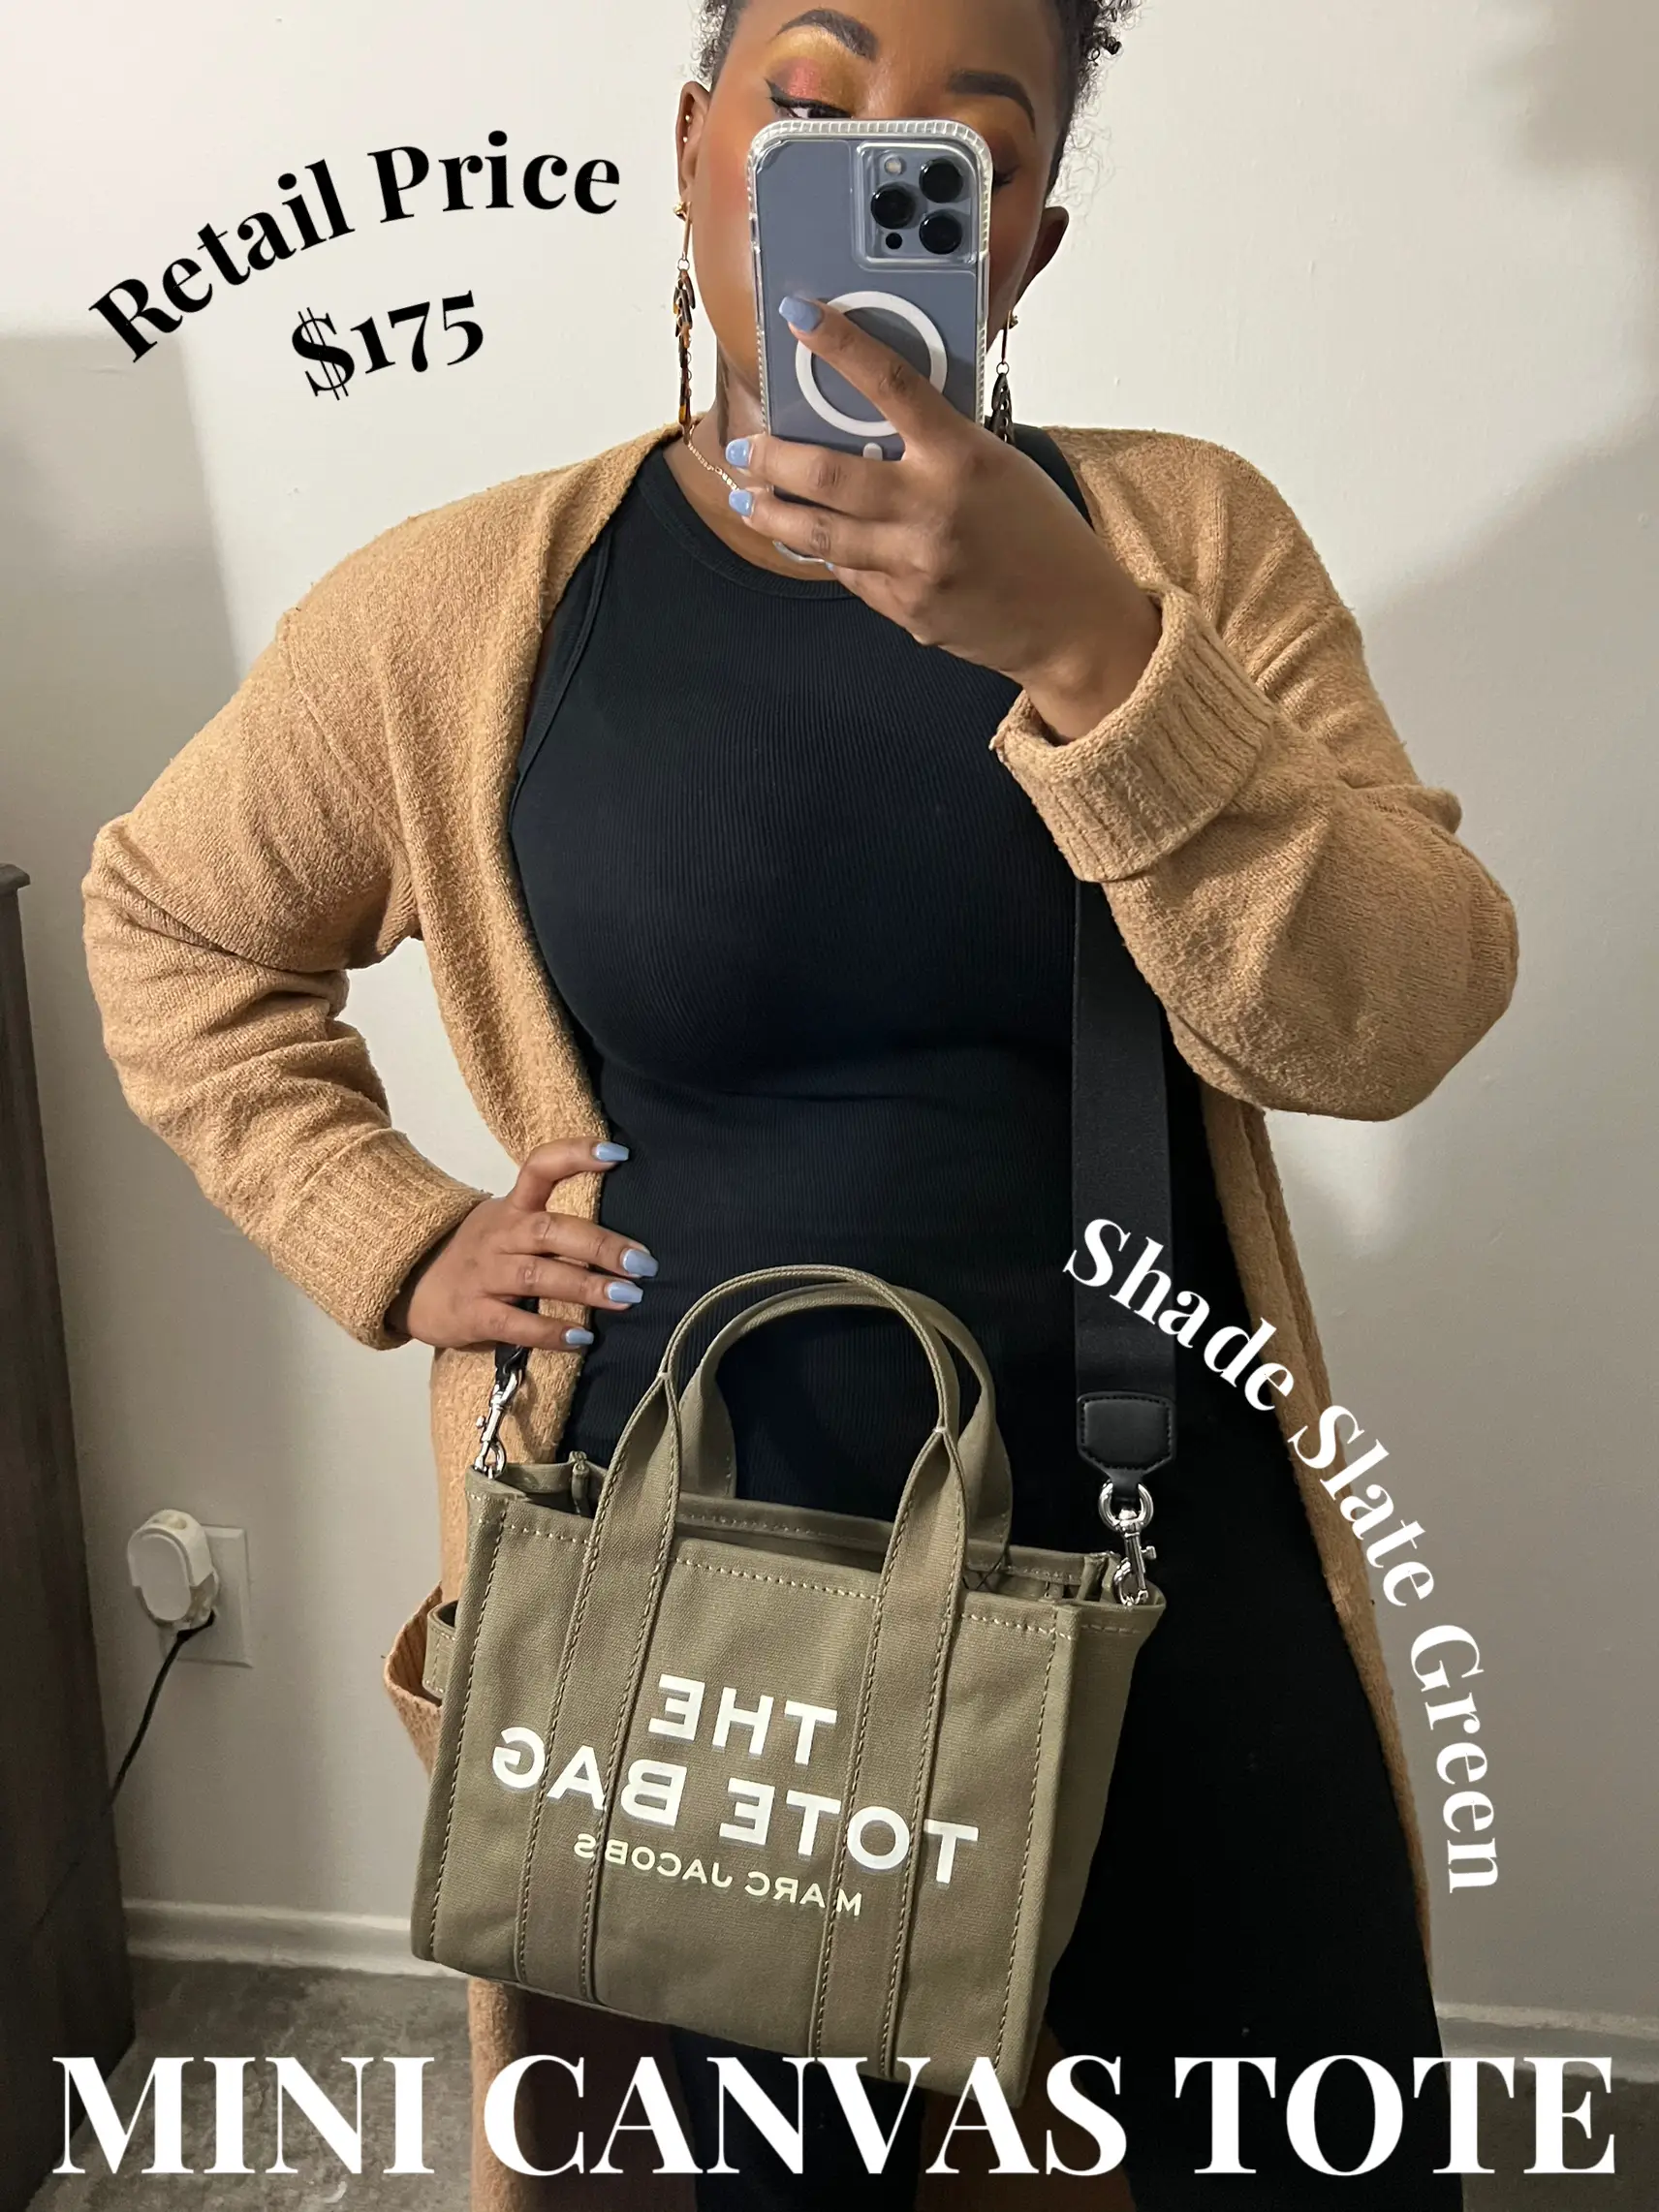 First Impression Review, The Marc Jacobs Tote Bag Without A Big Logo